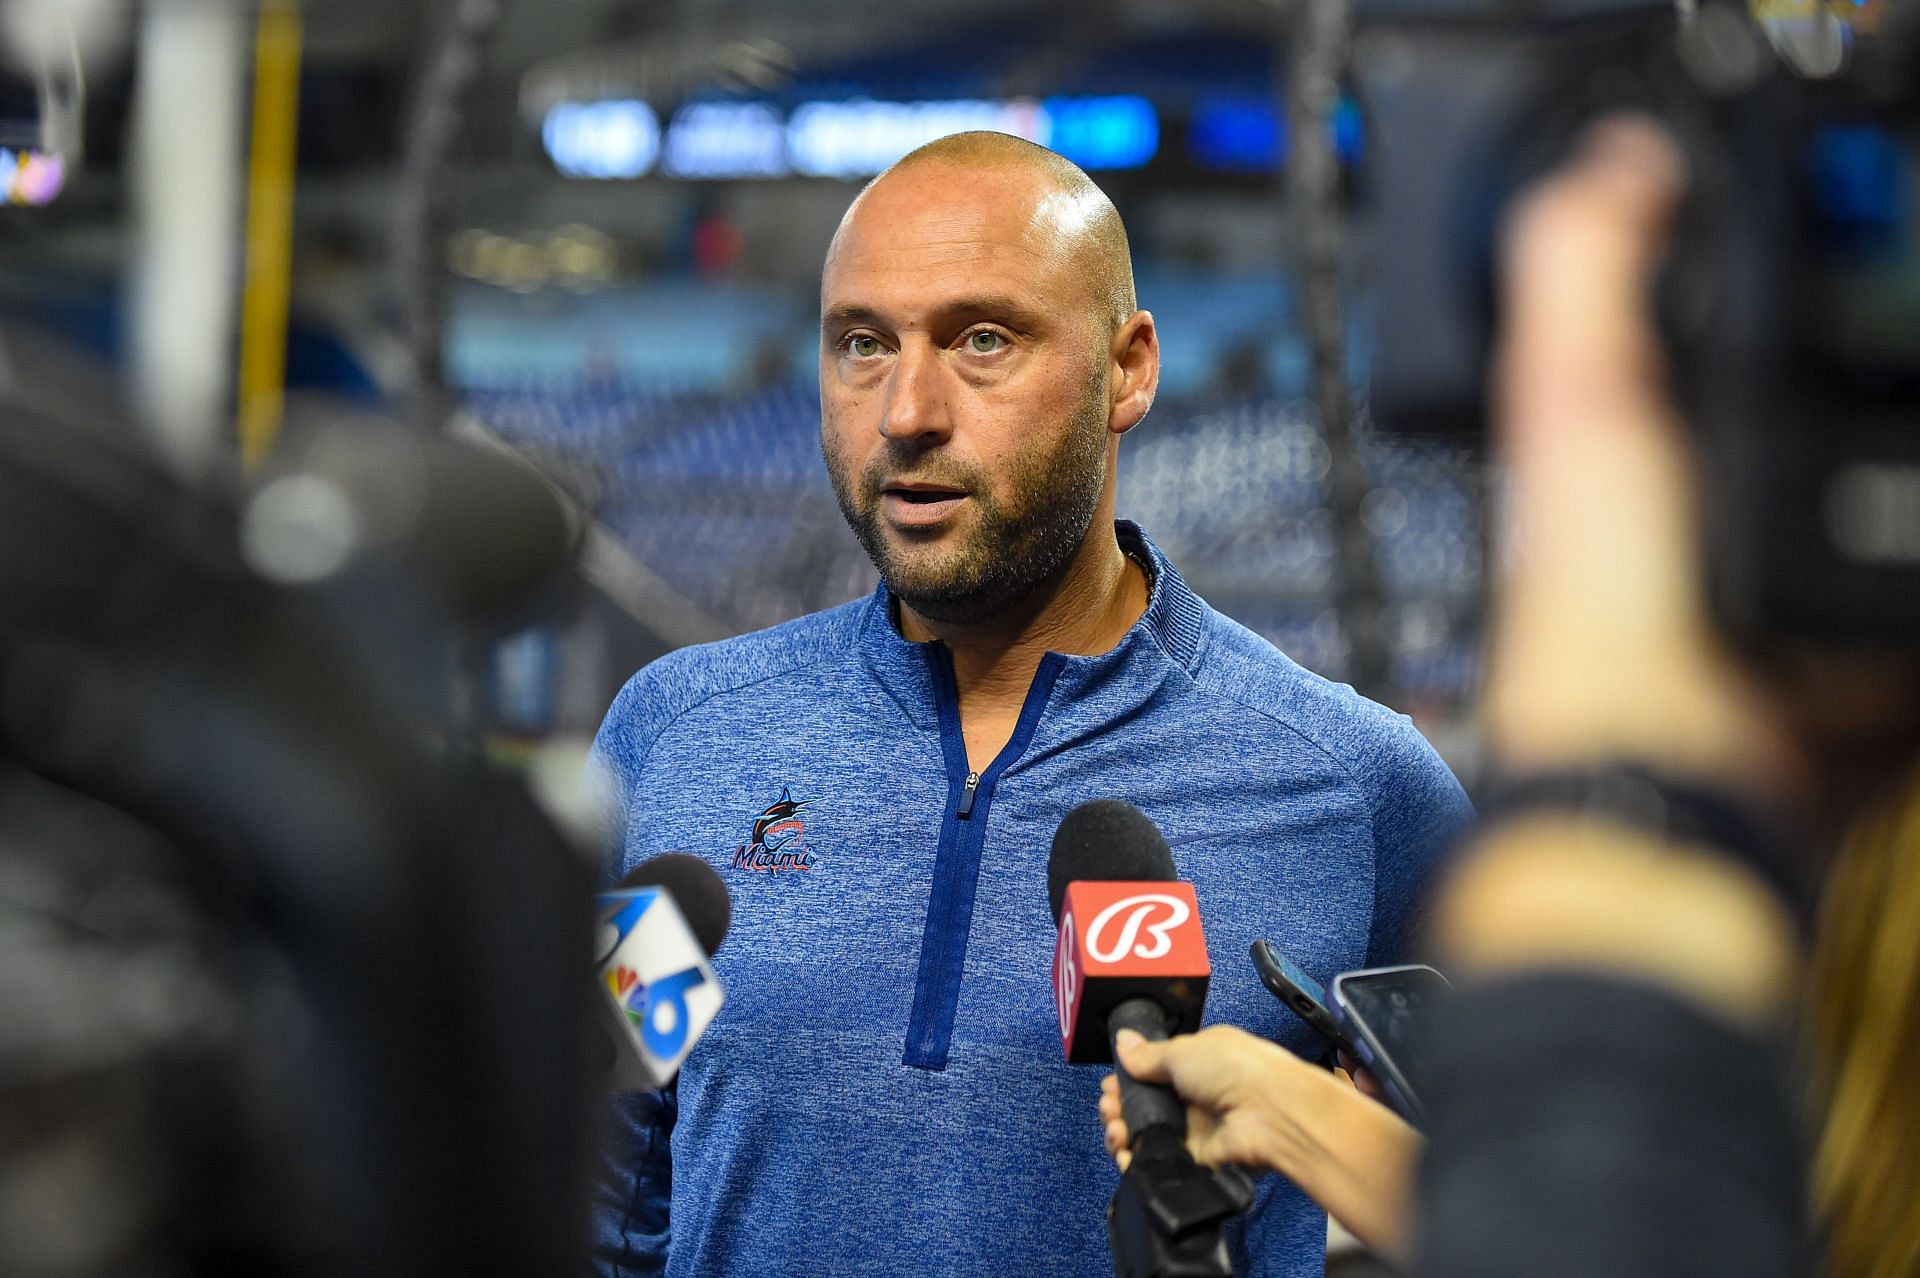 New York Yankees Legend Derek Jeter Would Not Use This Very Personal Item  to Raise Money For Charity Despite His Annual $250,000 Pledge -  EssentiallySports